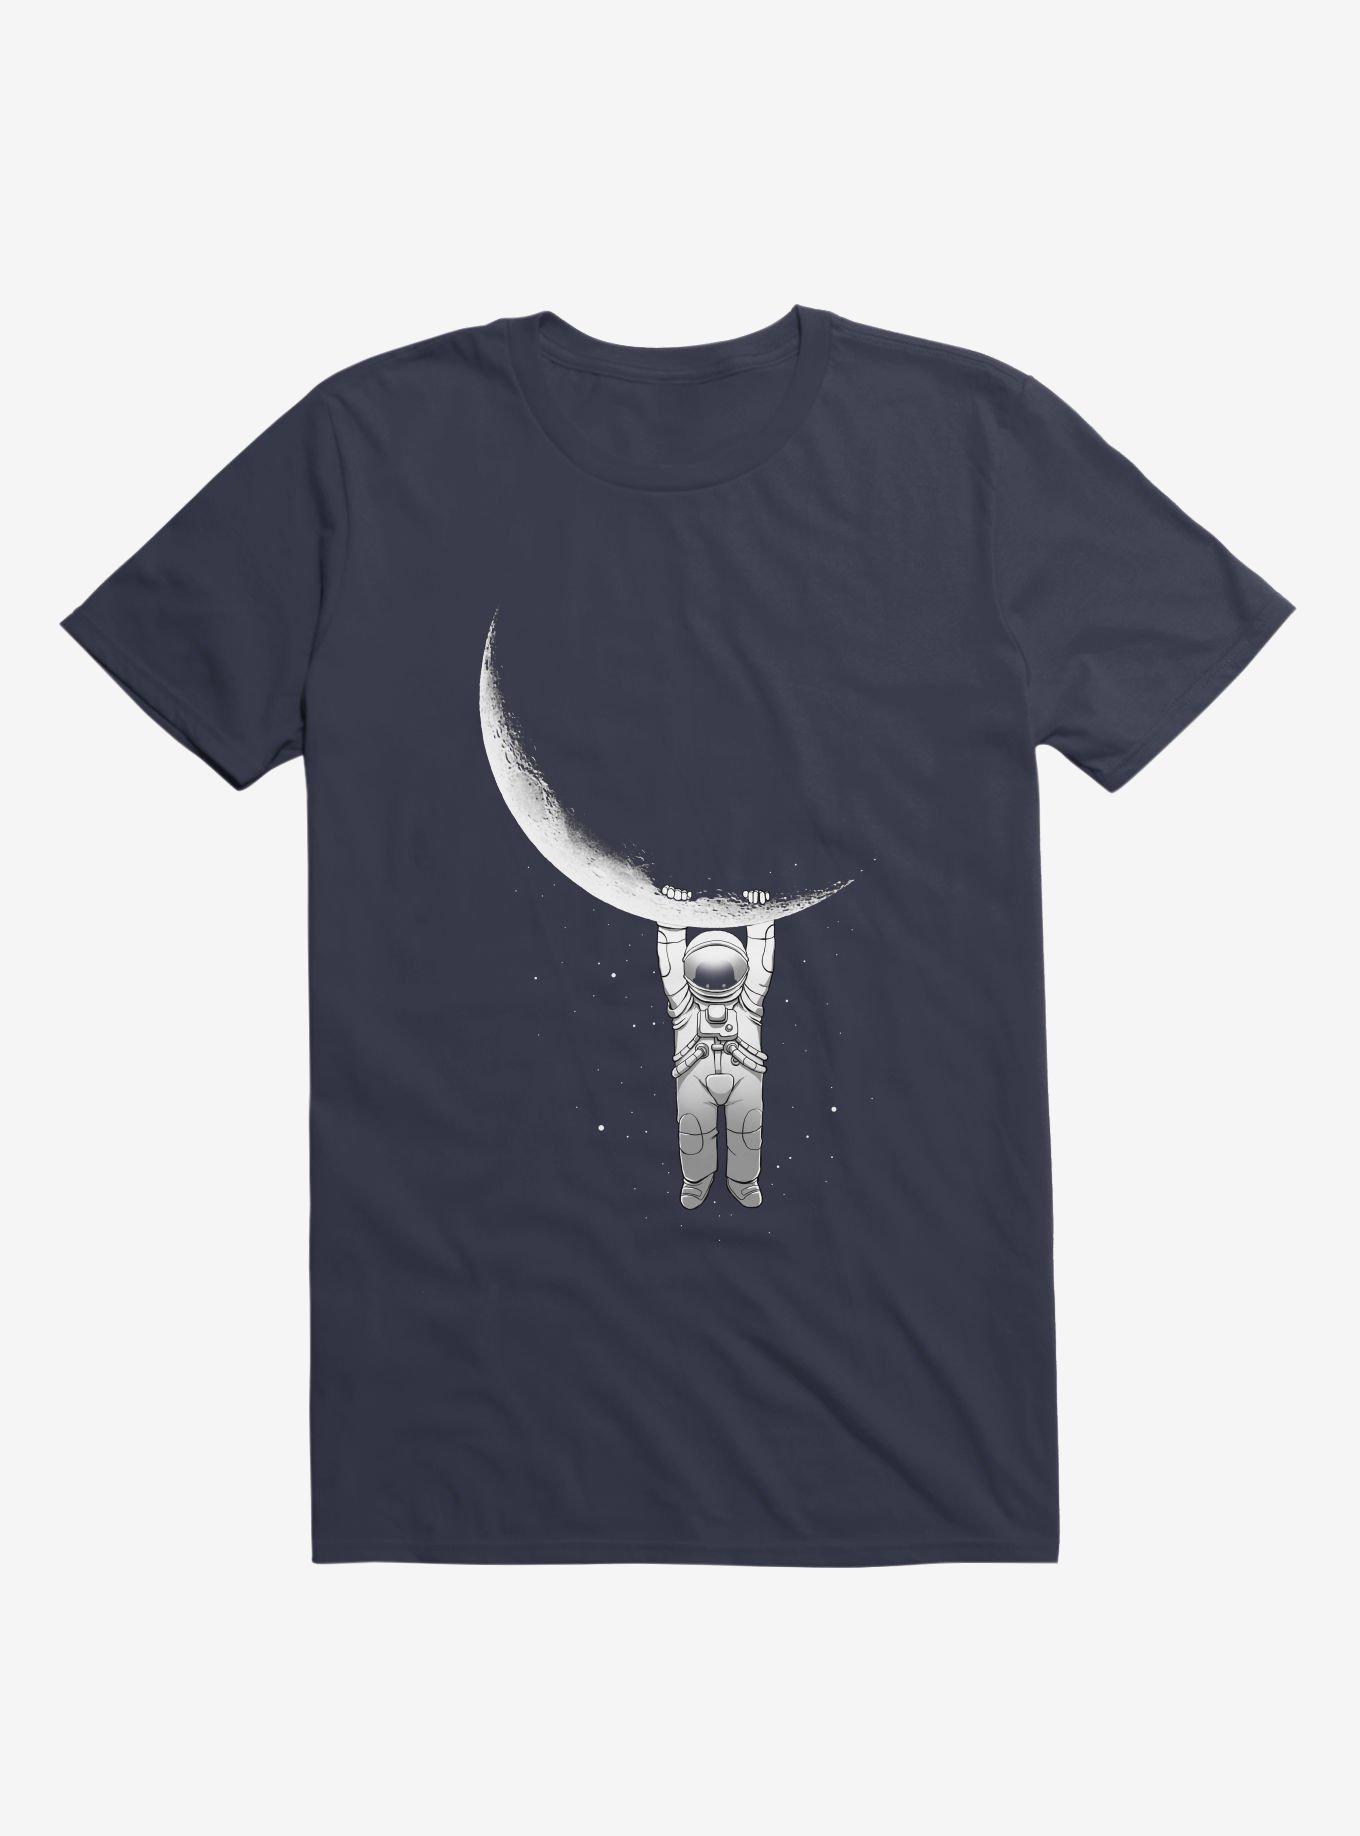 Astronaut Holding On To Moon Navy Blue T-Shirt, NAVY, hi-res